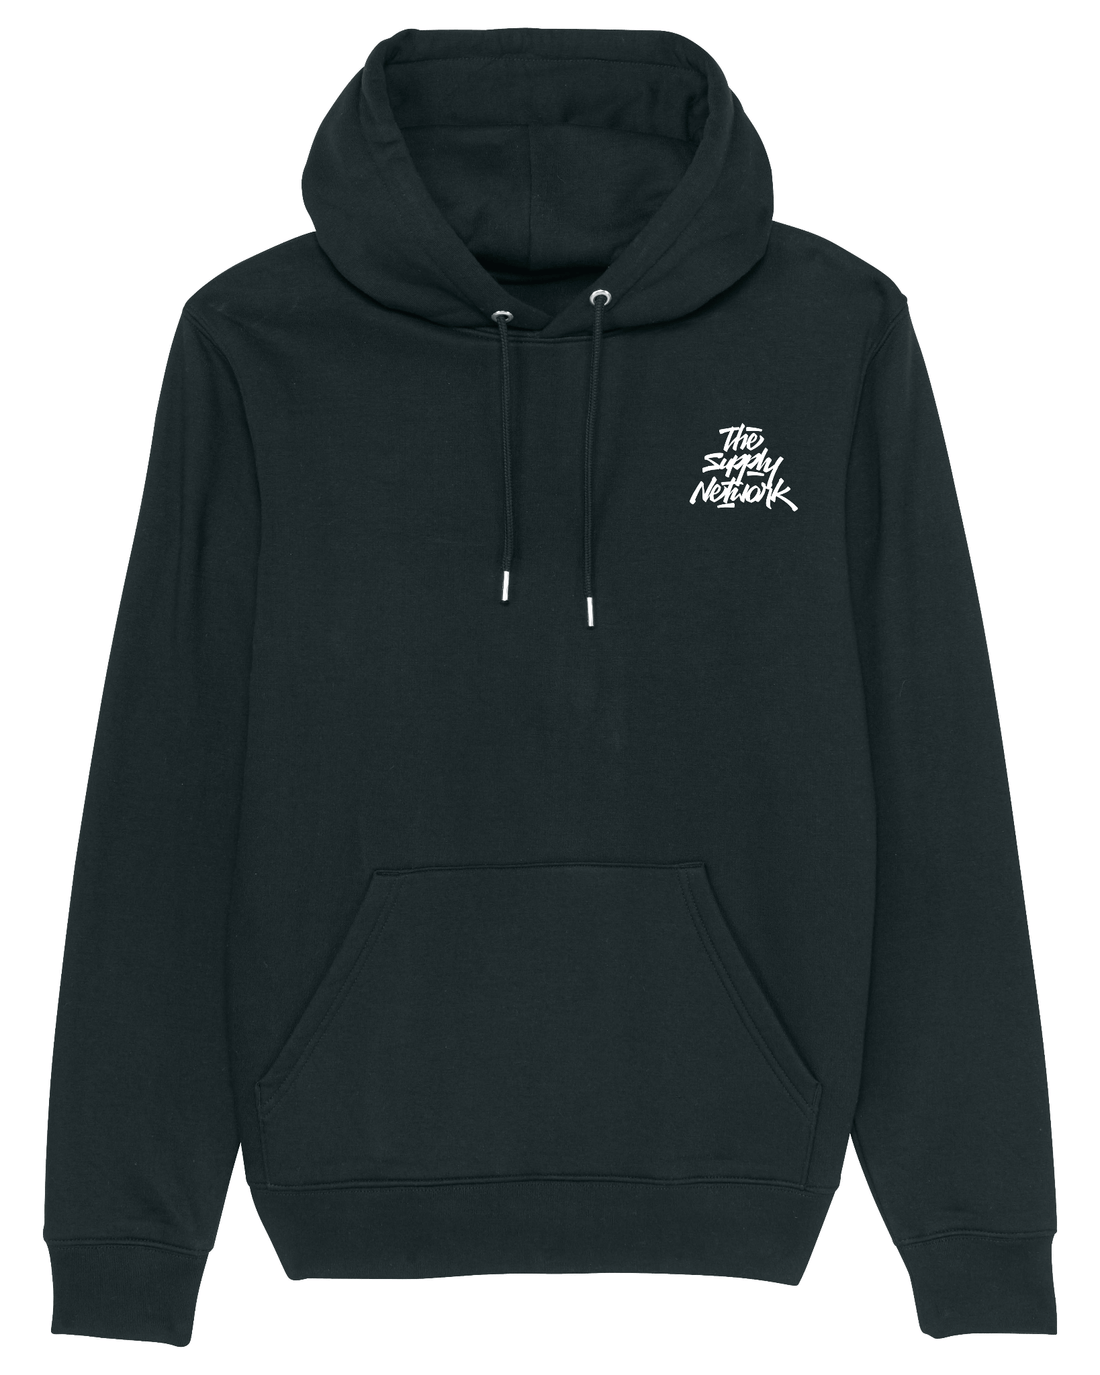 Black Skater Hoodie, The Supply Network Front Print